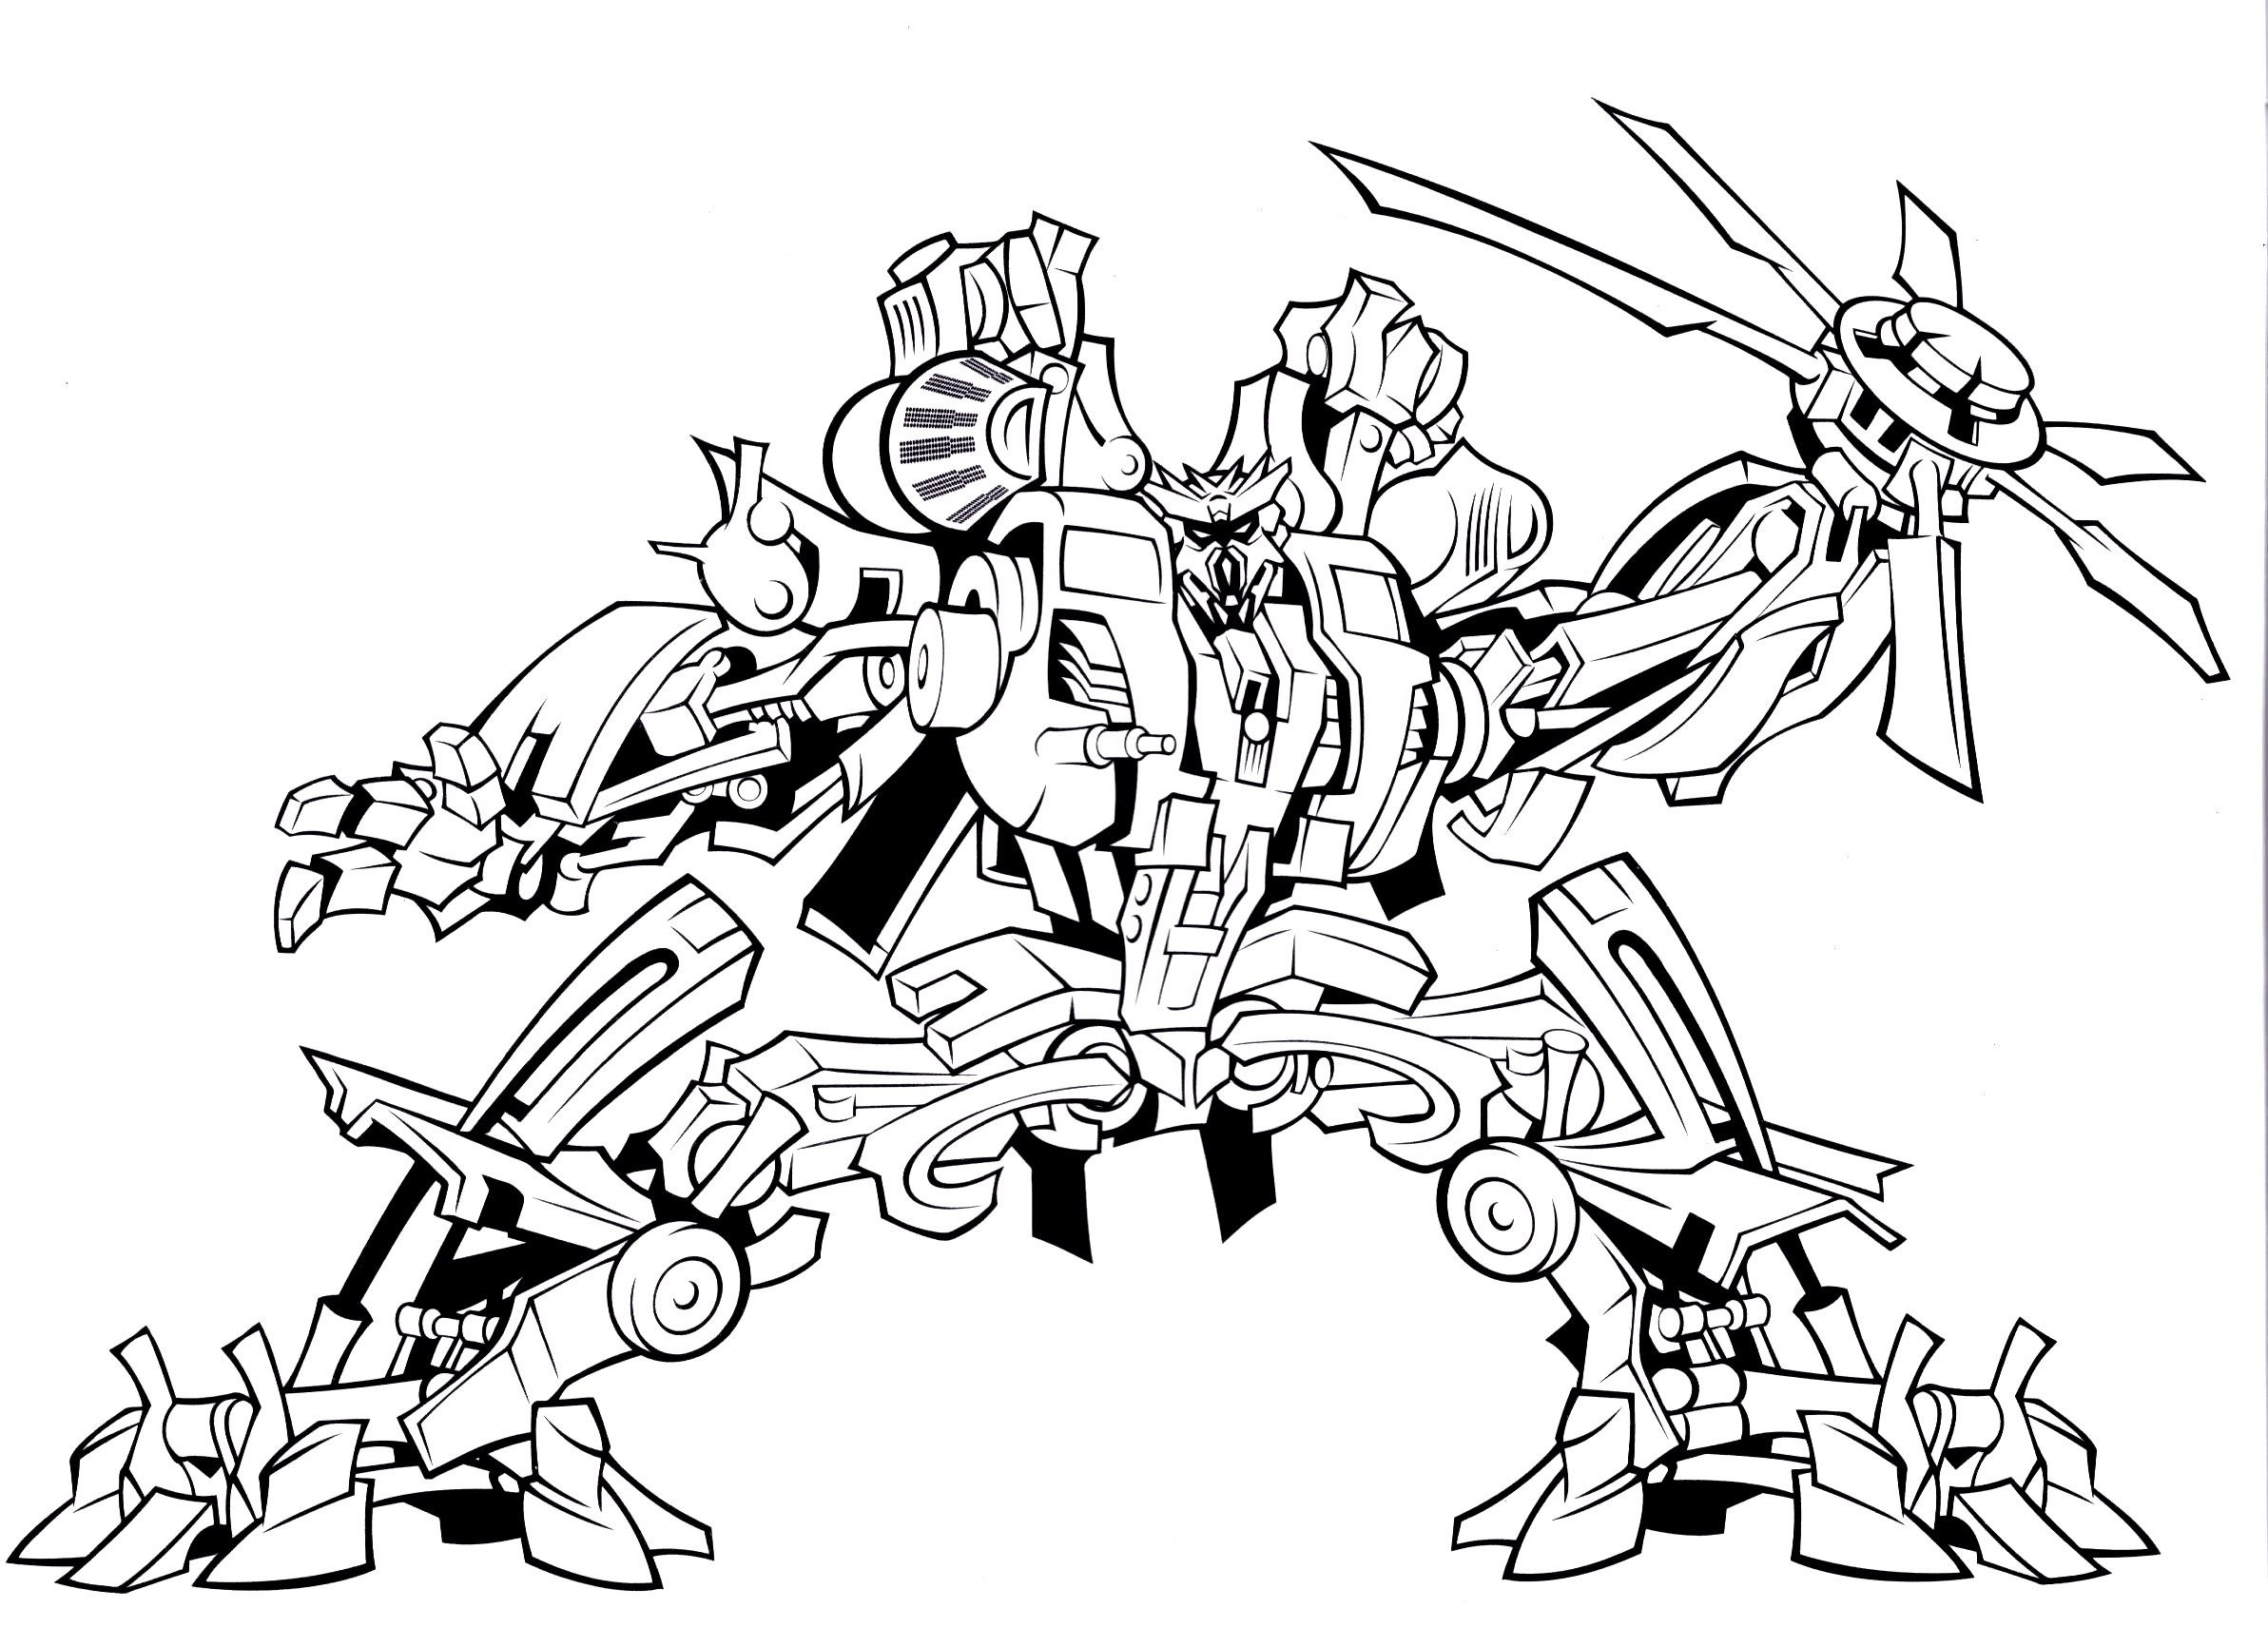 Unique Transformers 4 Coloring Pages Free Printable | Coloring Pages - Transformers 4 Coloring Pages Free Printable